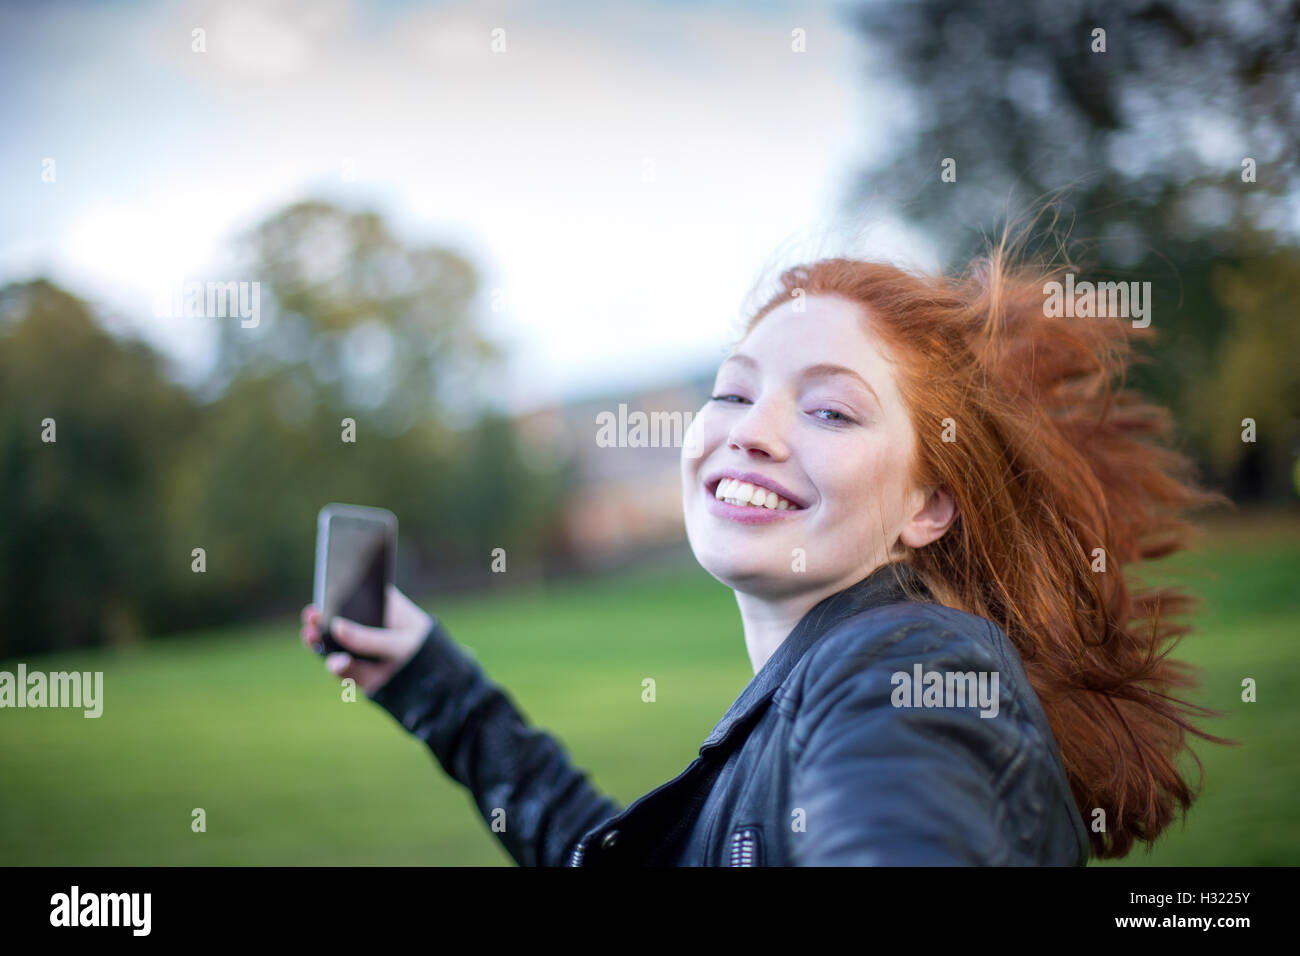 Point of view shot of a woman spinning round. She is holding on to her partners hand and is holding a smartphone. Stock Photo